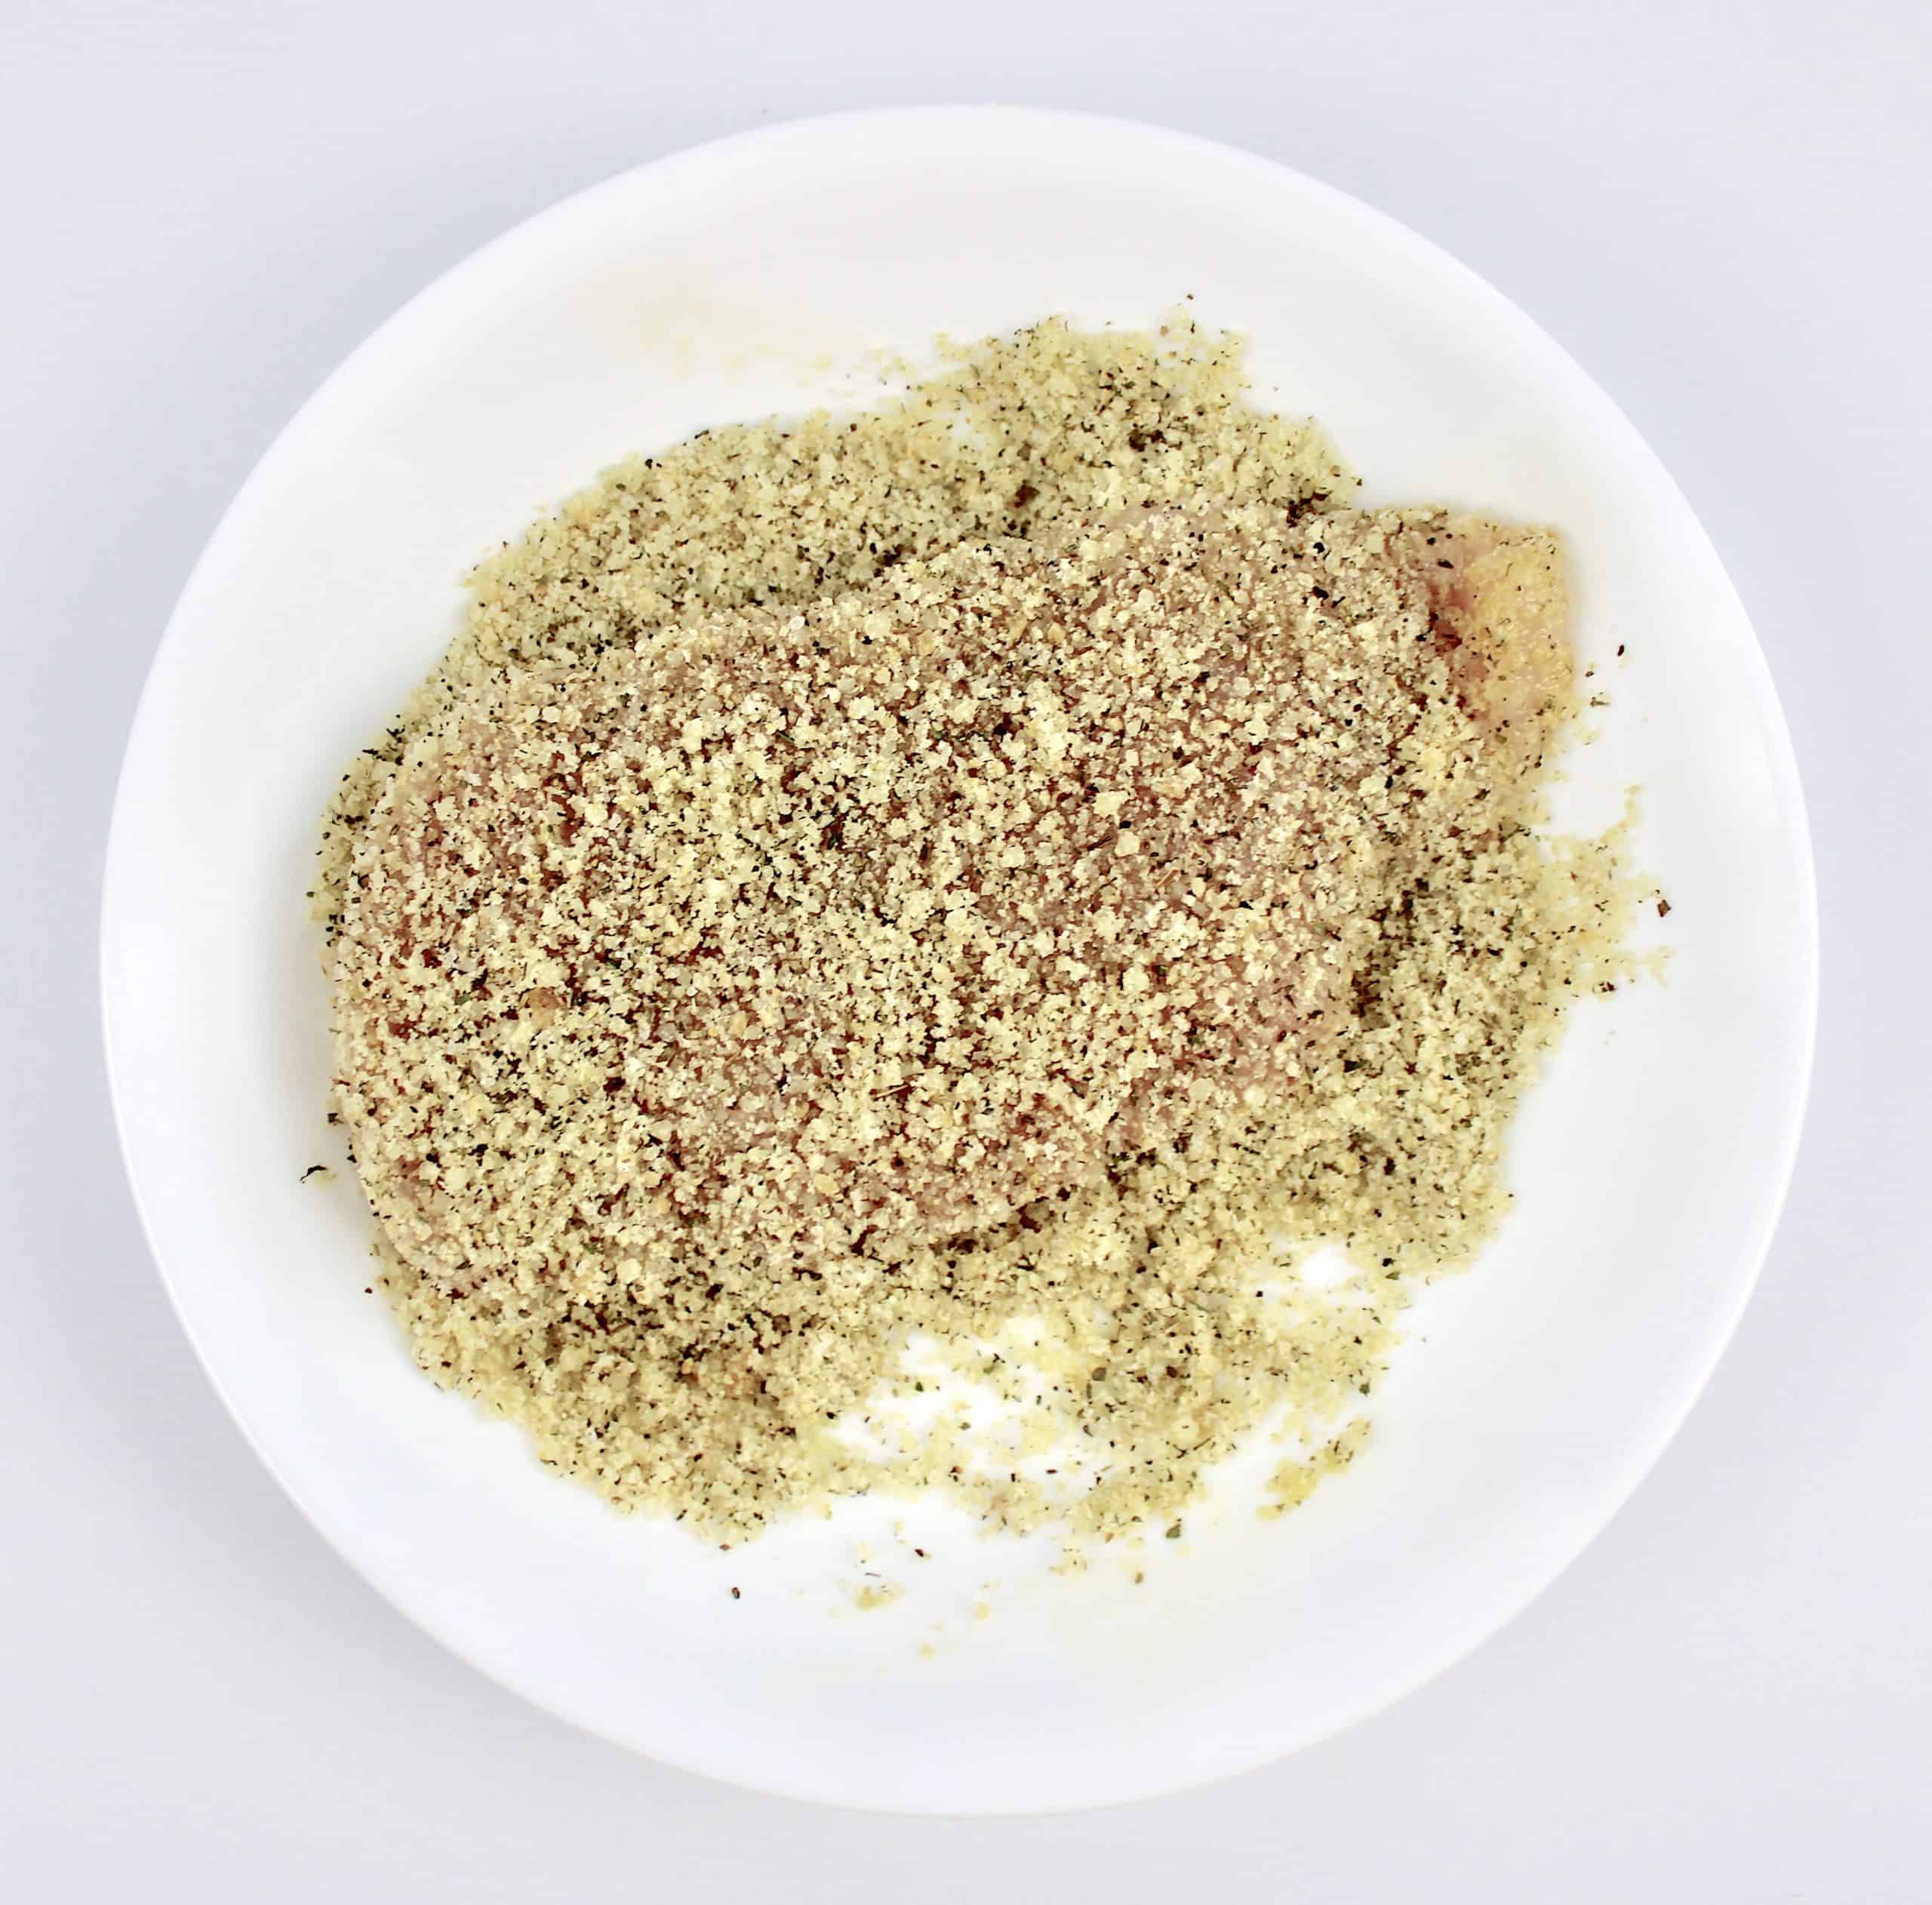 chicken breast in breading mixture in white plate